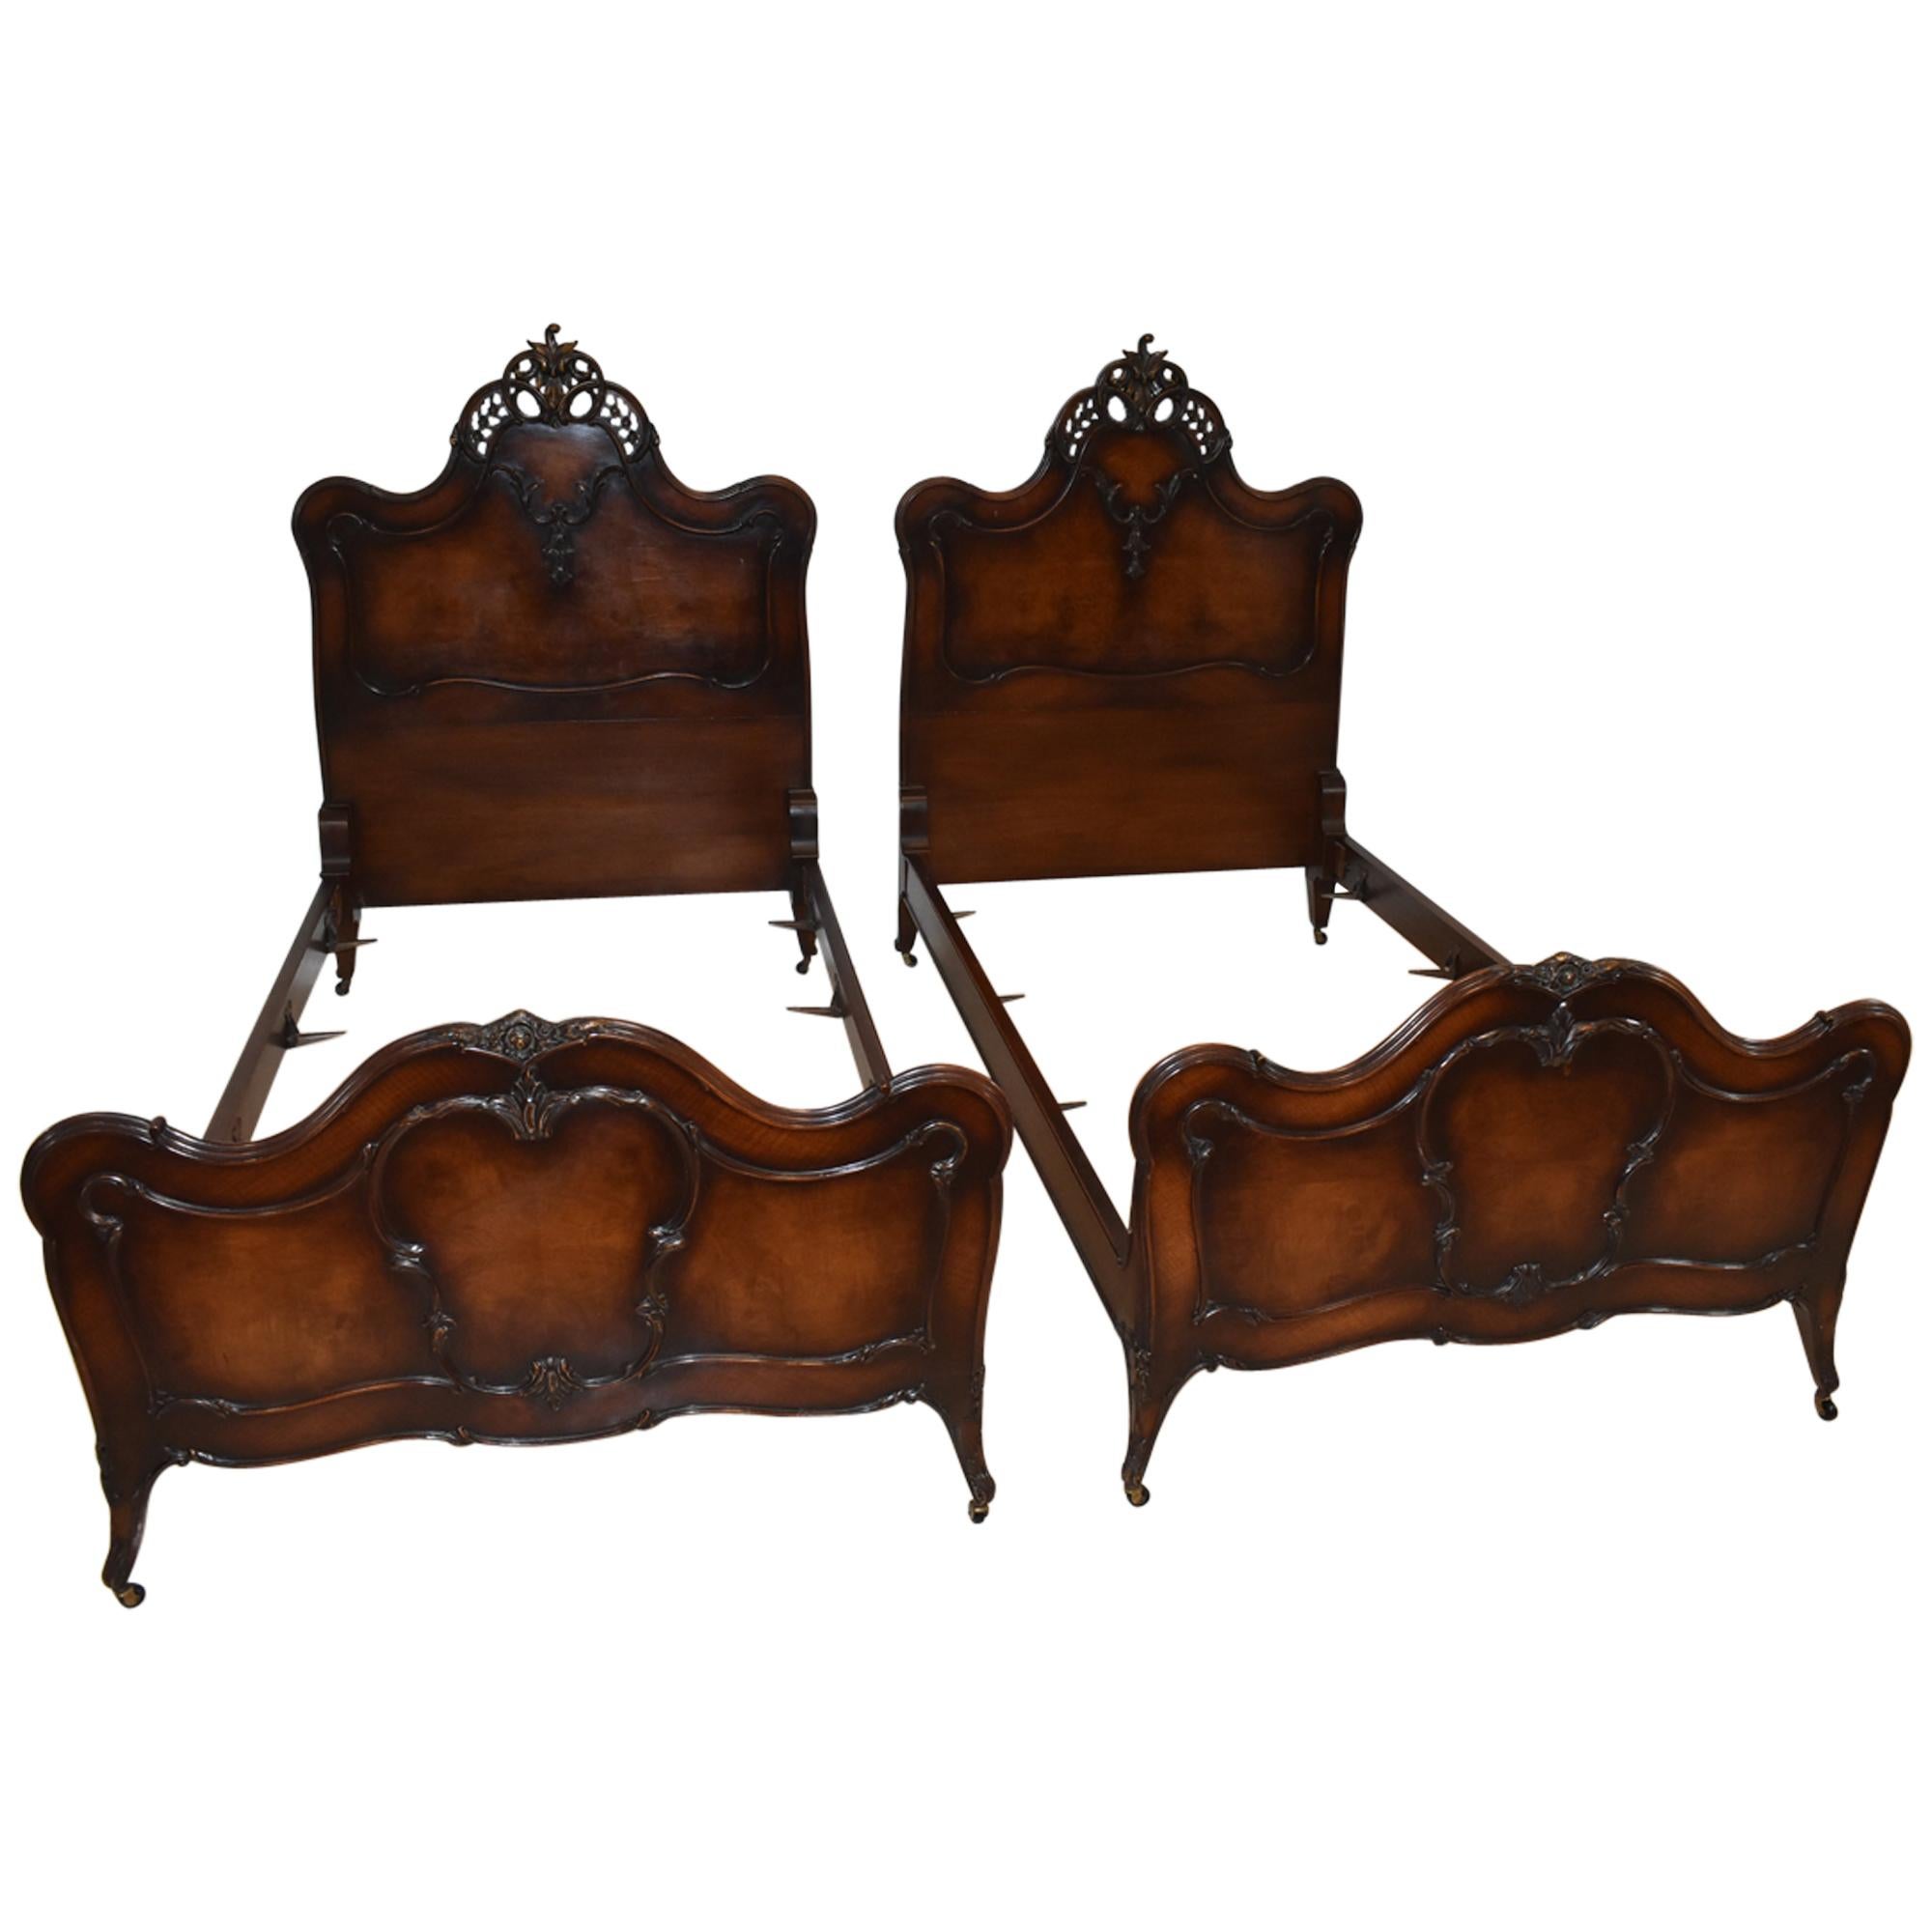 Pair of French Louie XV Style Walnut Twin Bed Frames by Irwin Furniture